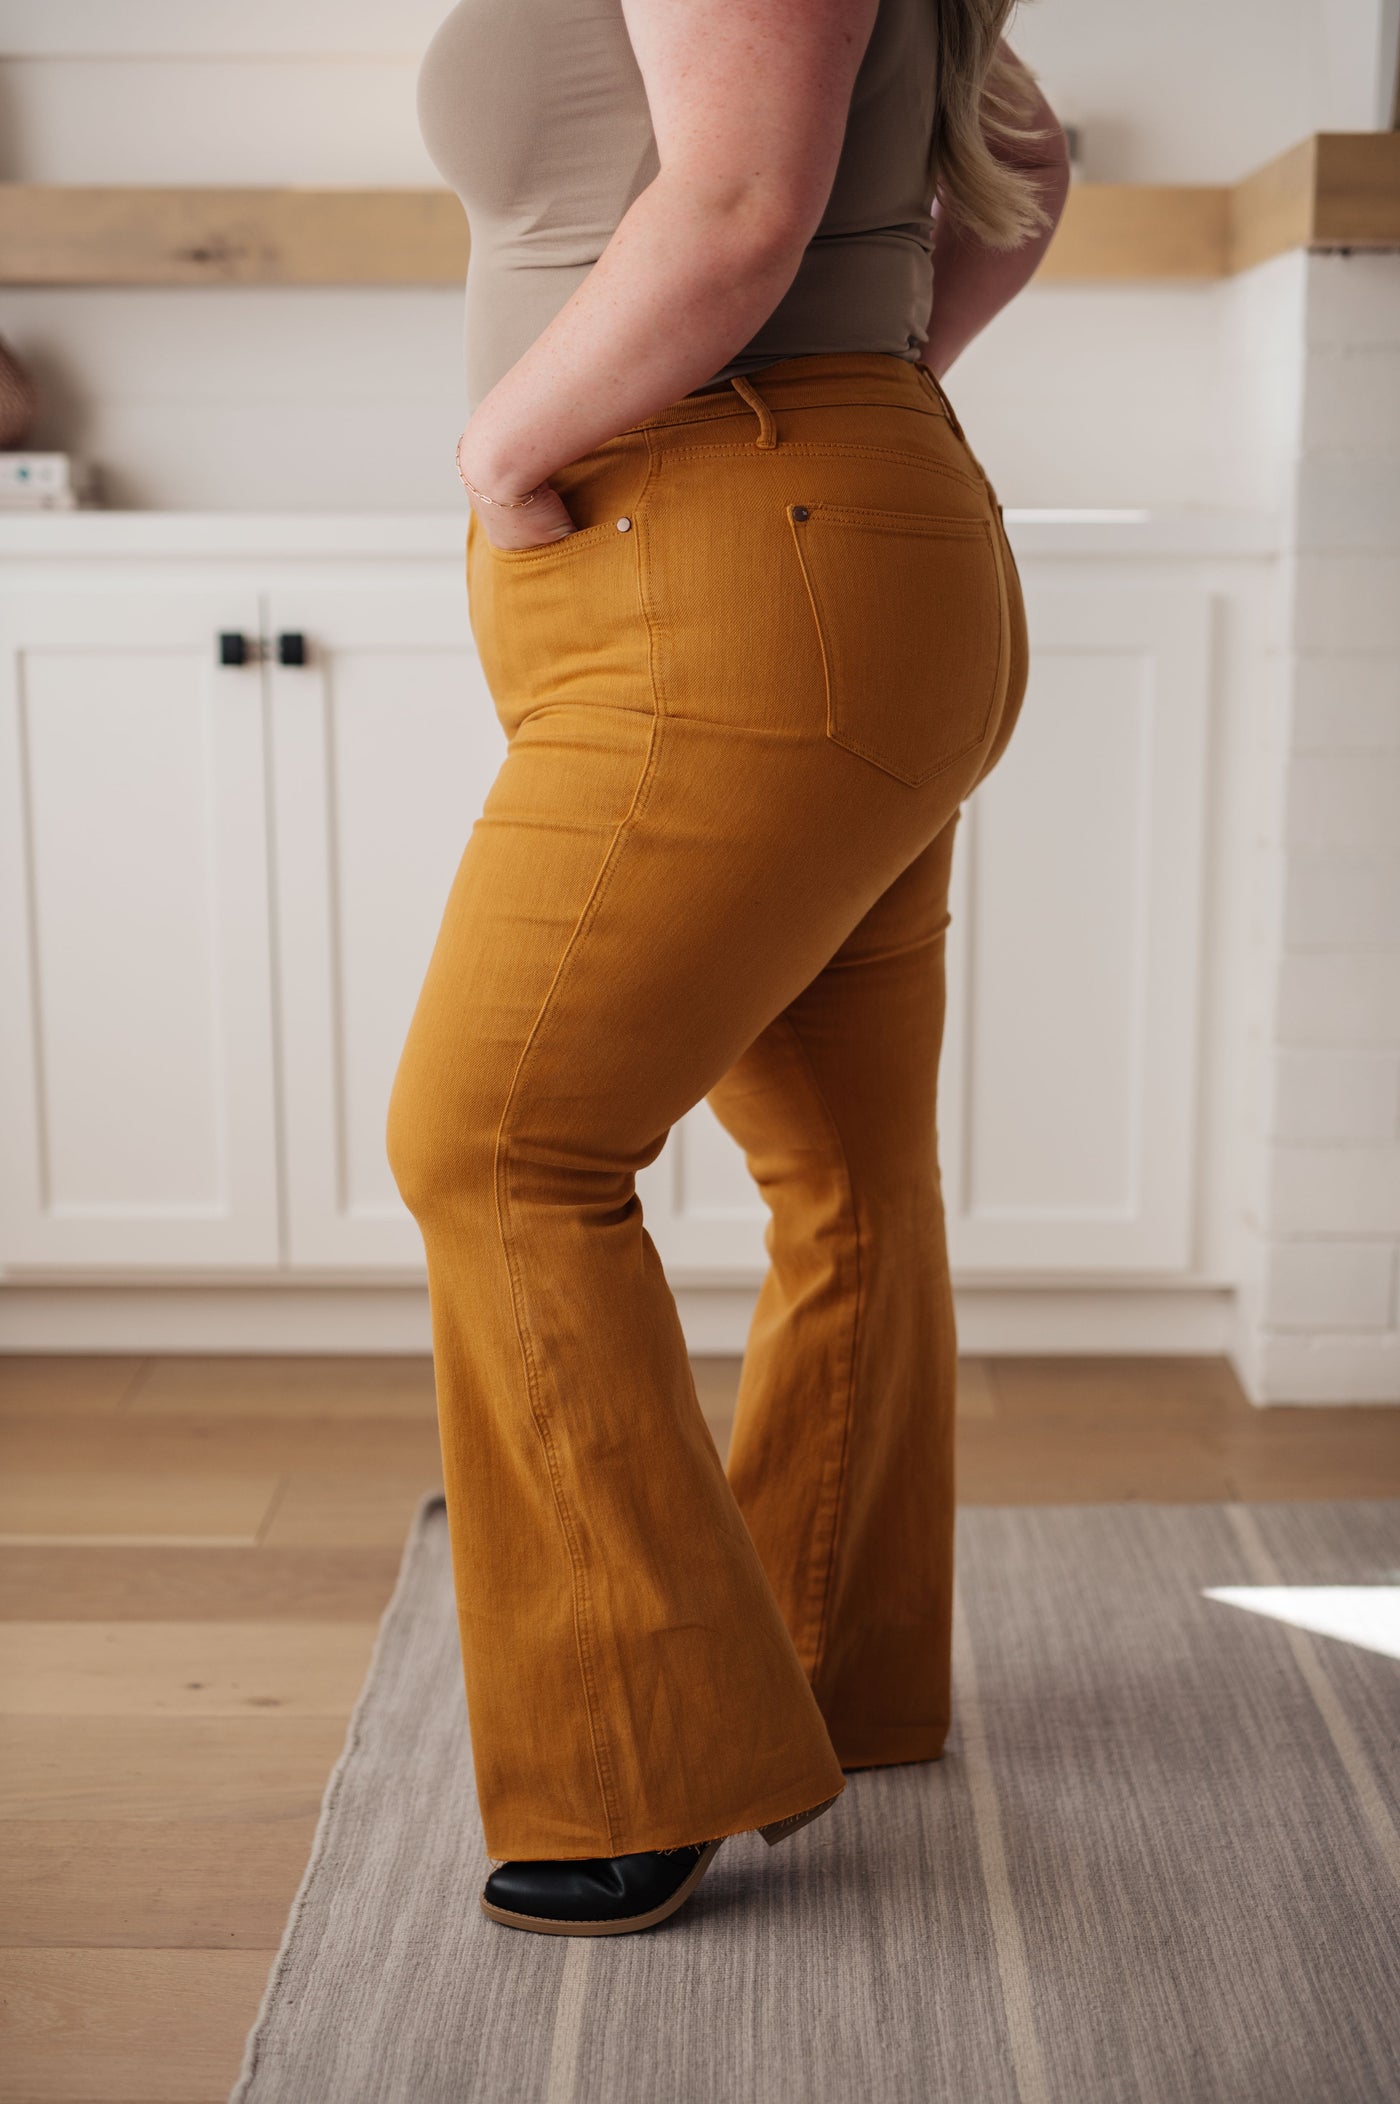 Judy Blue | Marigold  High Rise Control Top Flare Jeans